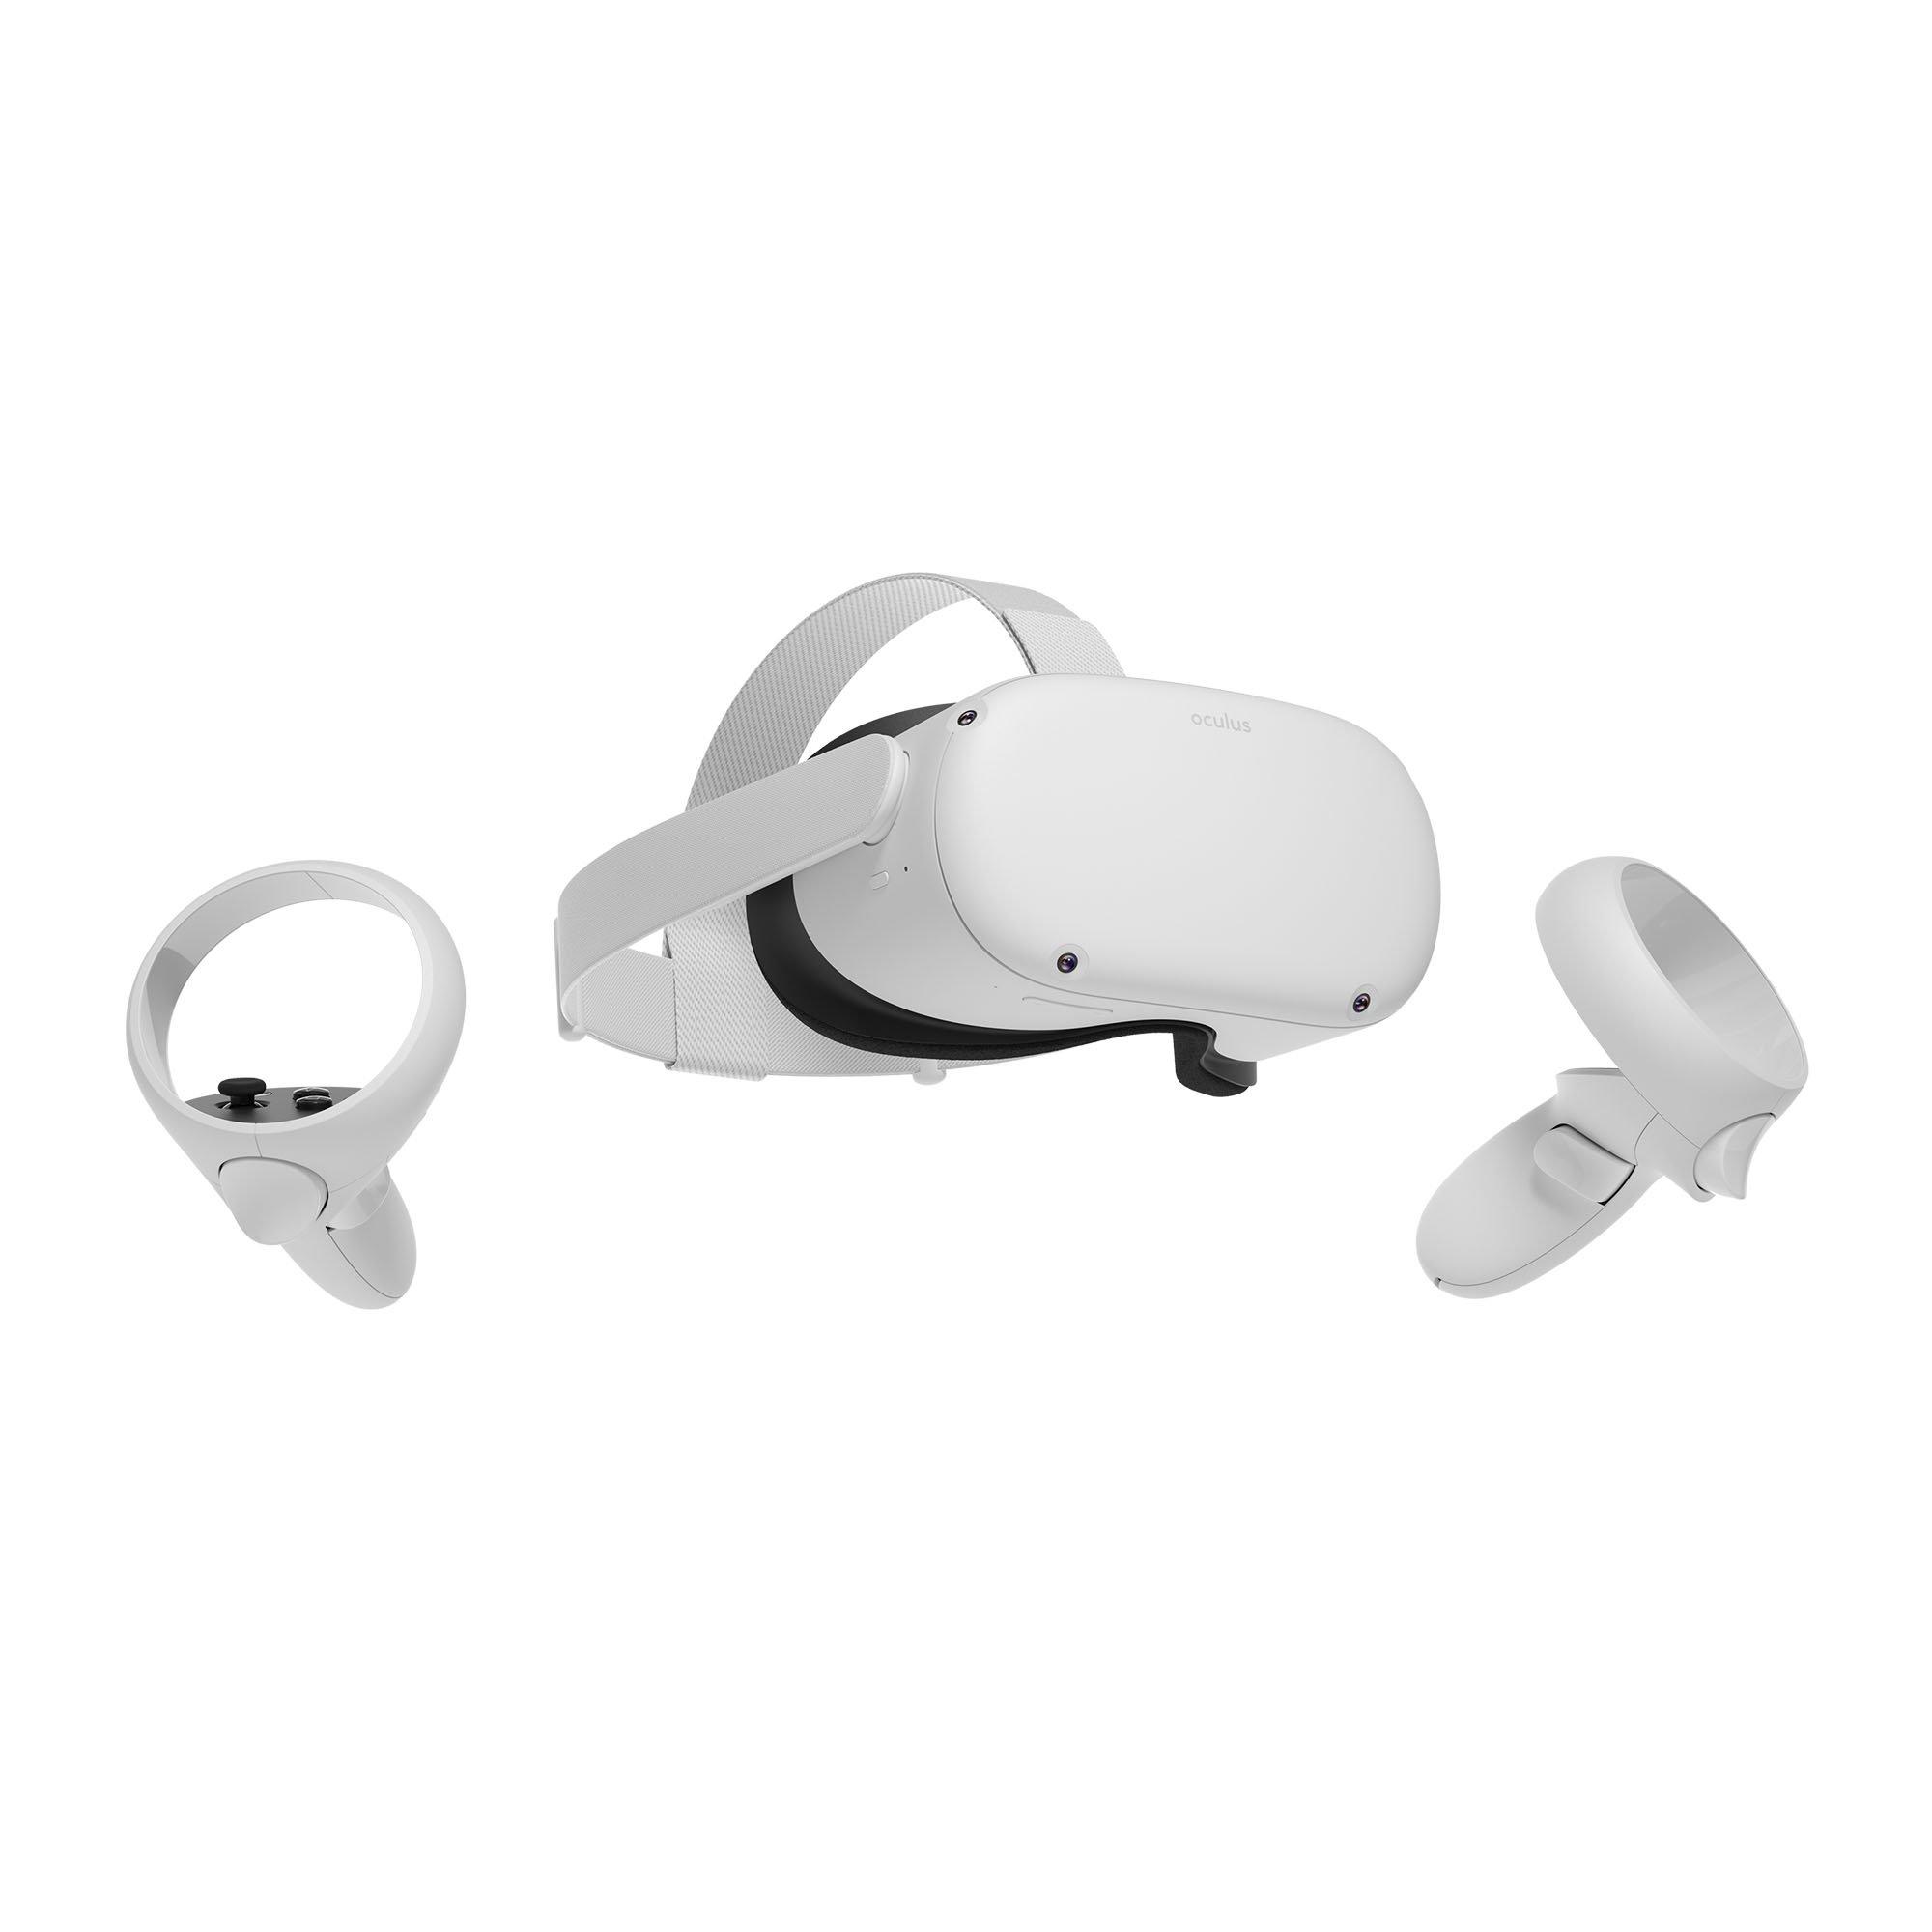 Meta Quest 2 - Advanced All-In-One Virtual Reality (VR) Headset - 256GB |  GameStop